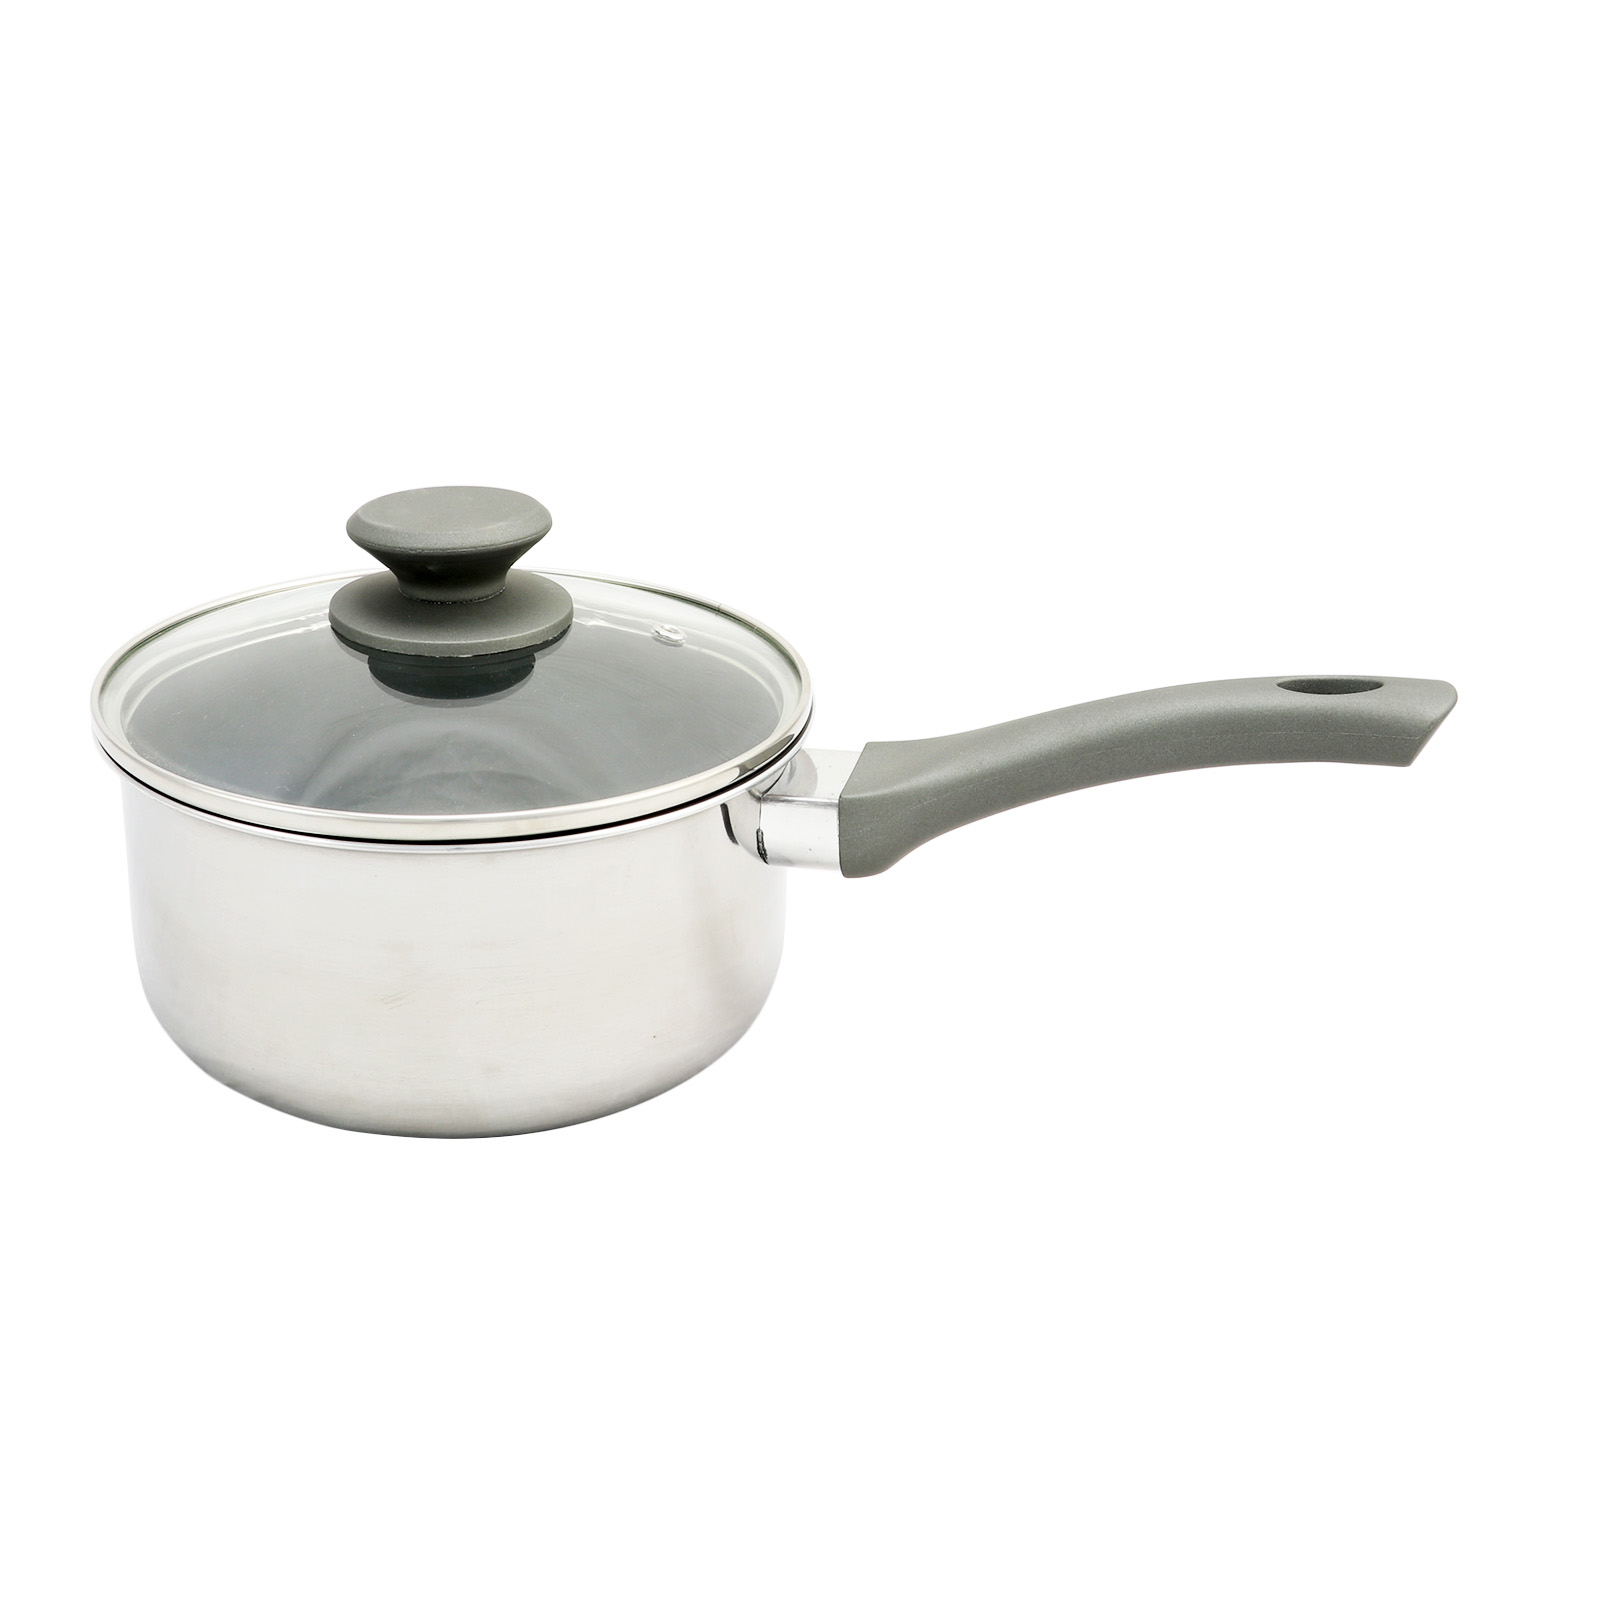 Oster Rivendell 2.5 Quart Aluminum & Stainless Steel Saucepan with Lid